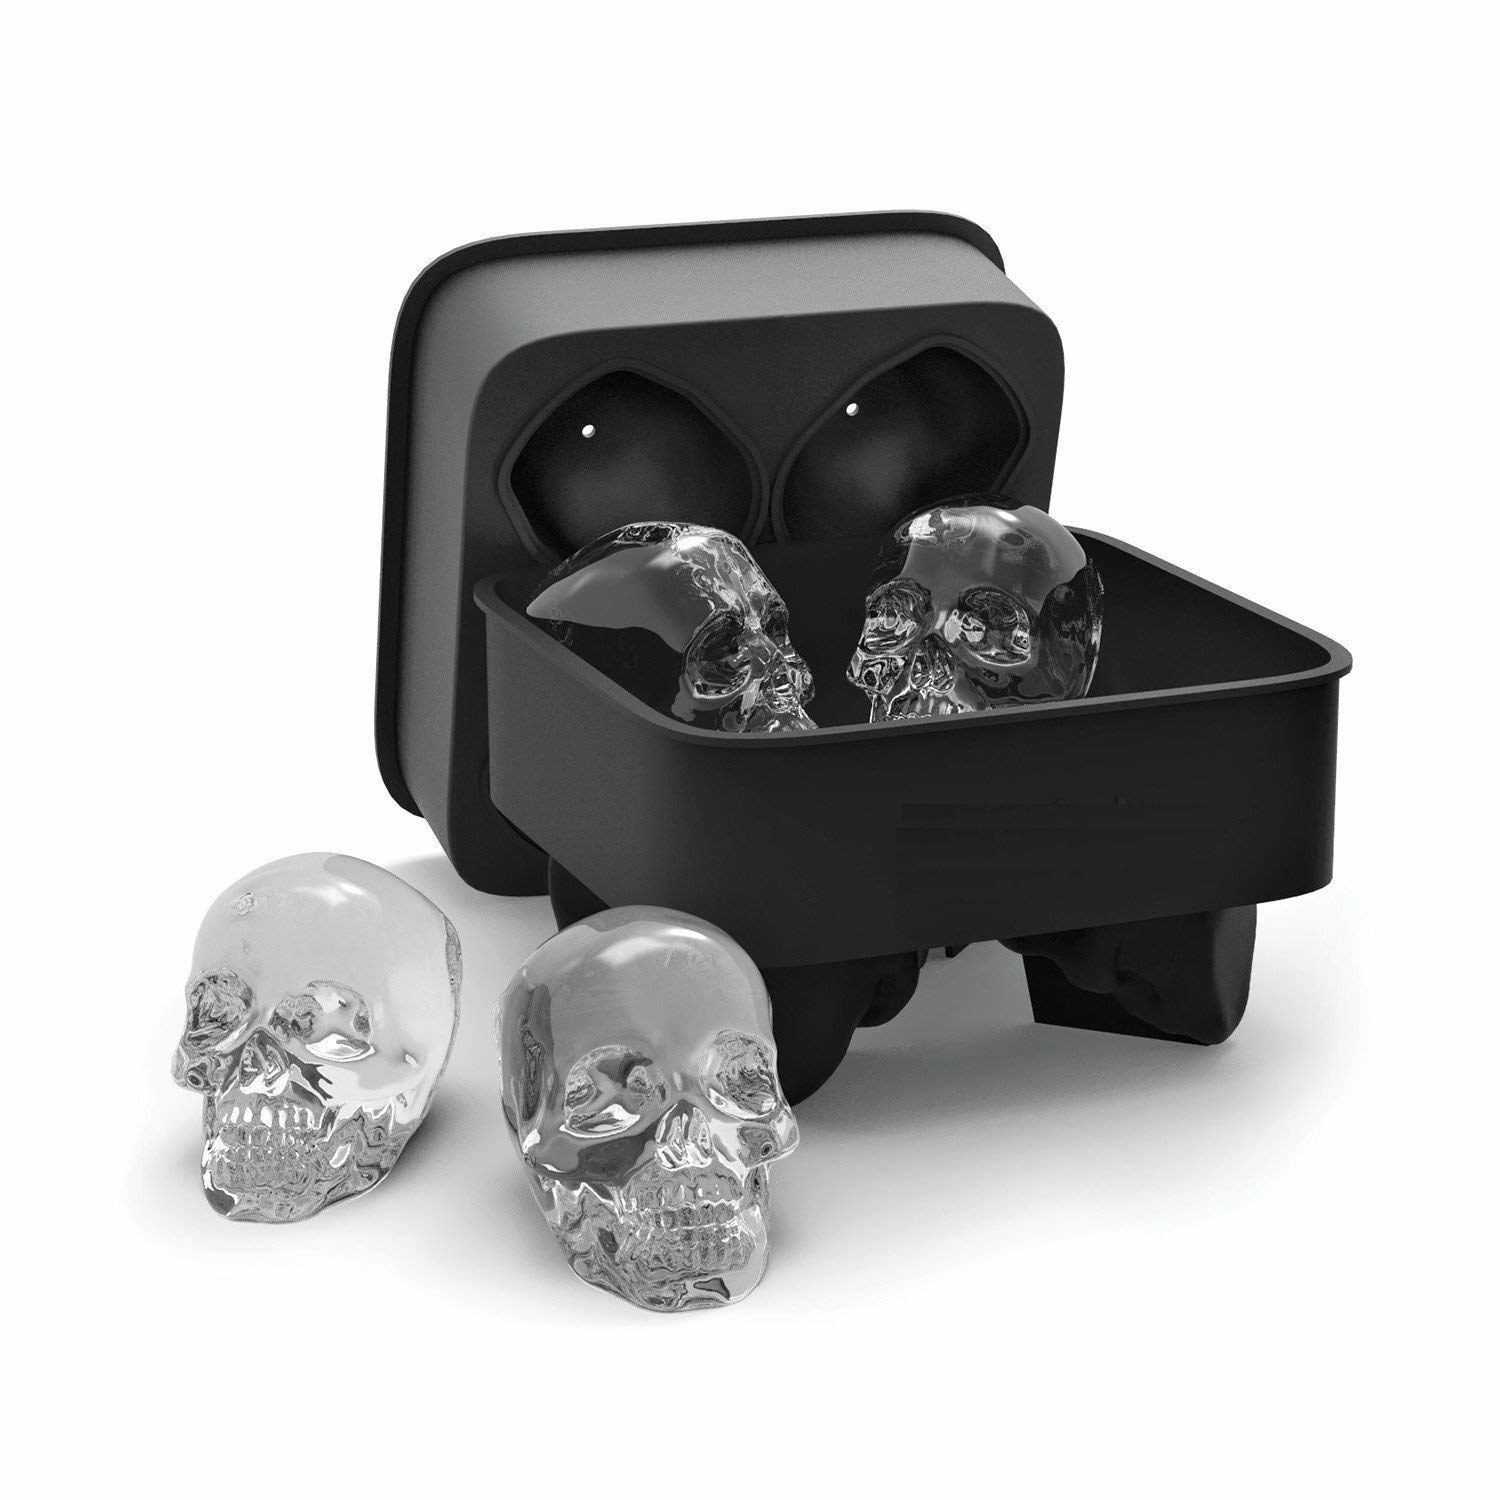 Four skull-shaped ice cubes inside and outside their black silicone container